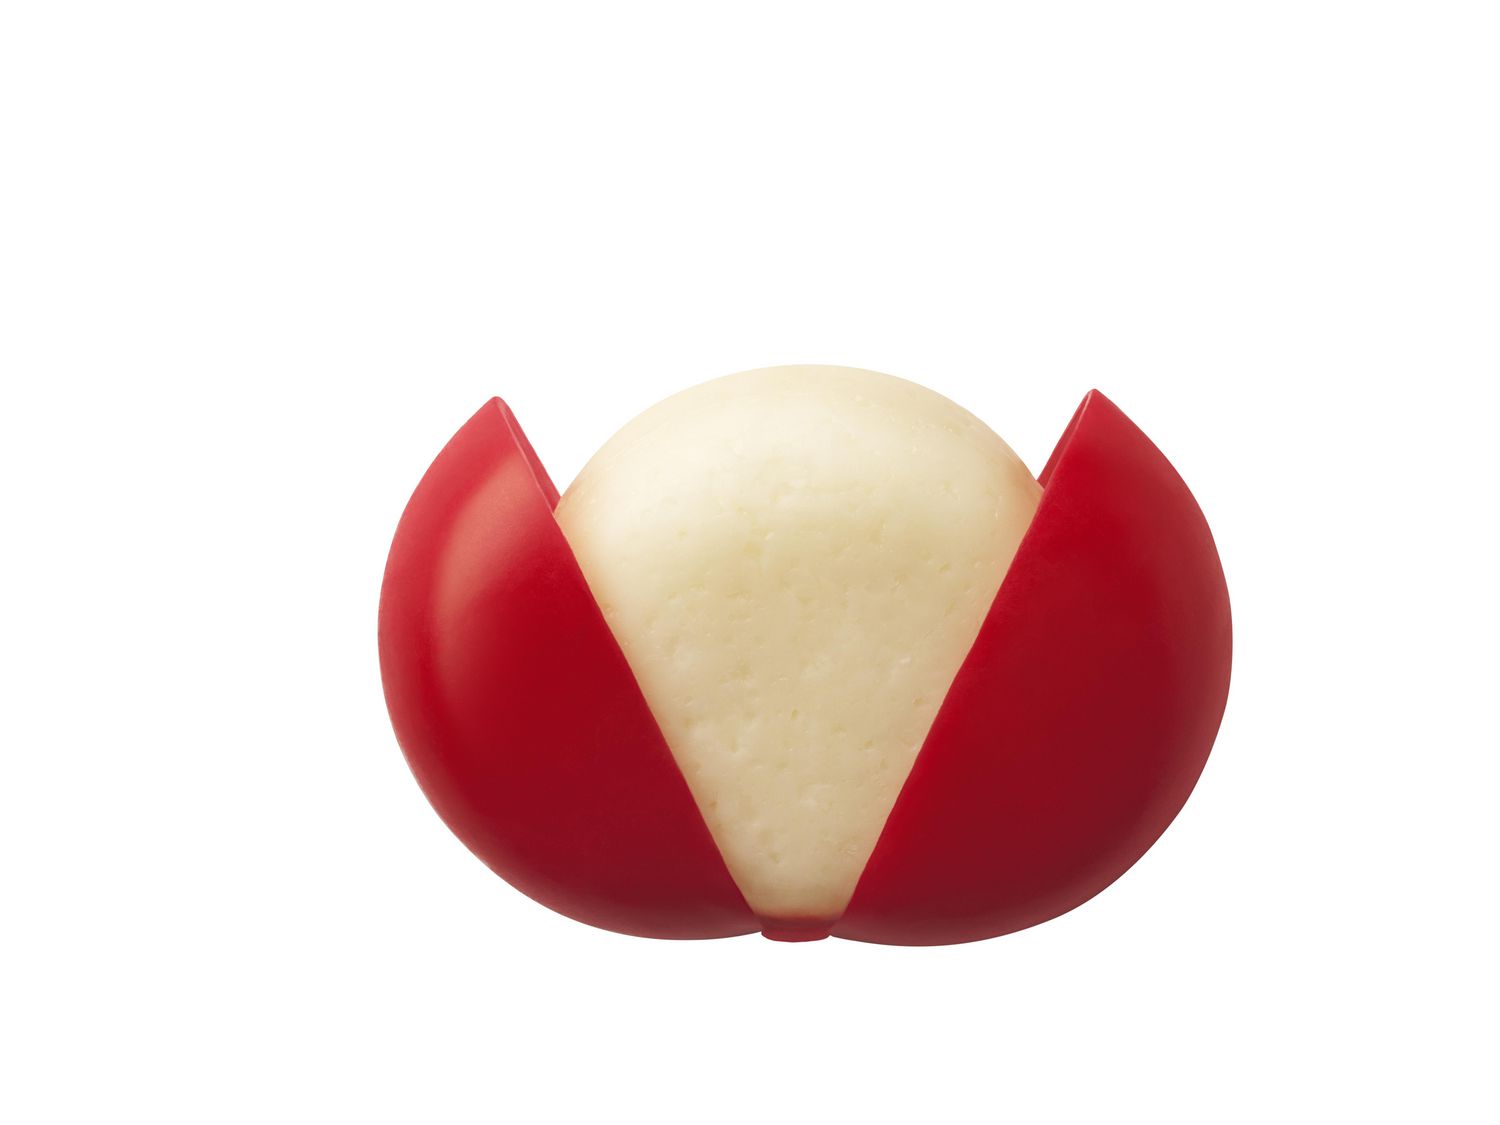 Babybel's giant shareable cheese is a Christmas innovation sensation